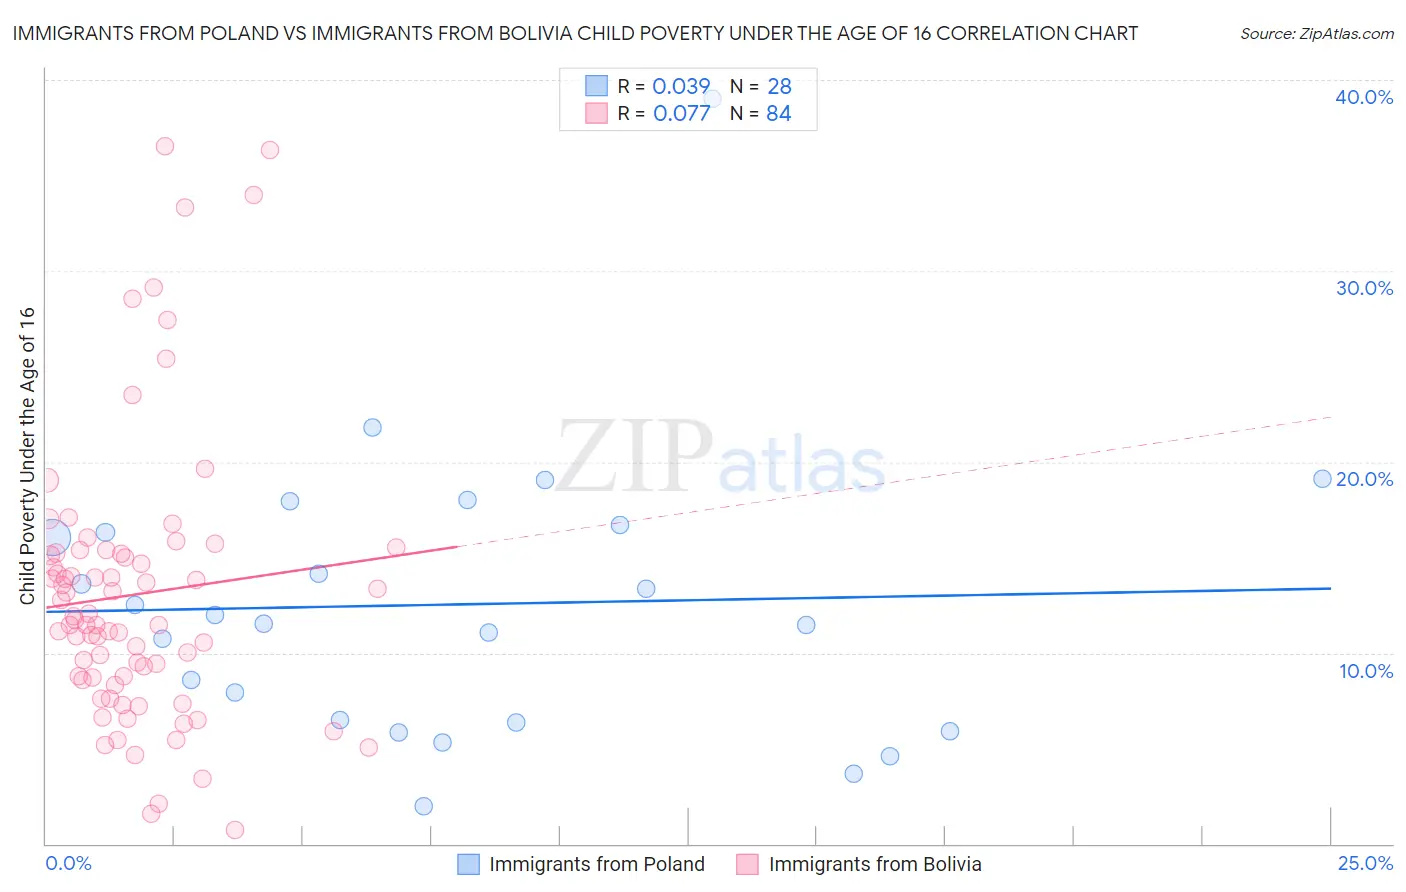 Immigrants from Poland vs Immigrants from Bolivia Child Poverty Under the Age of 16